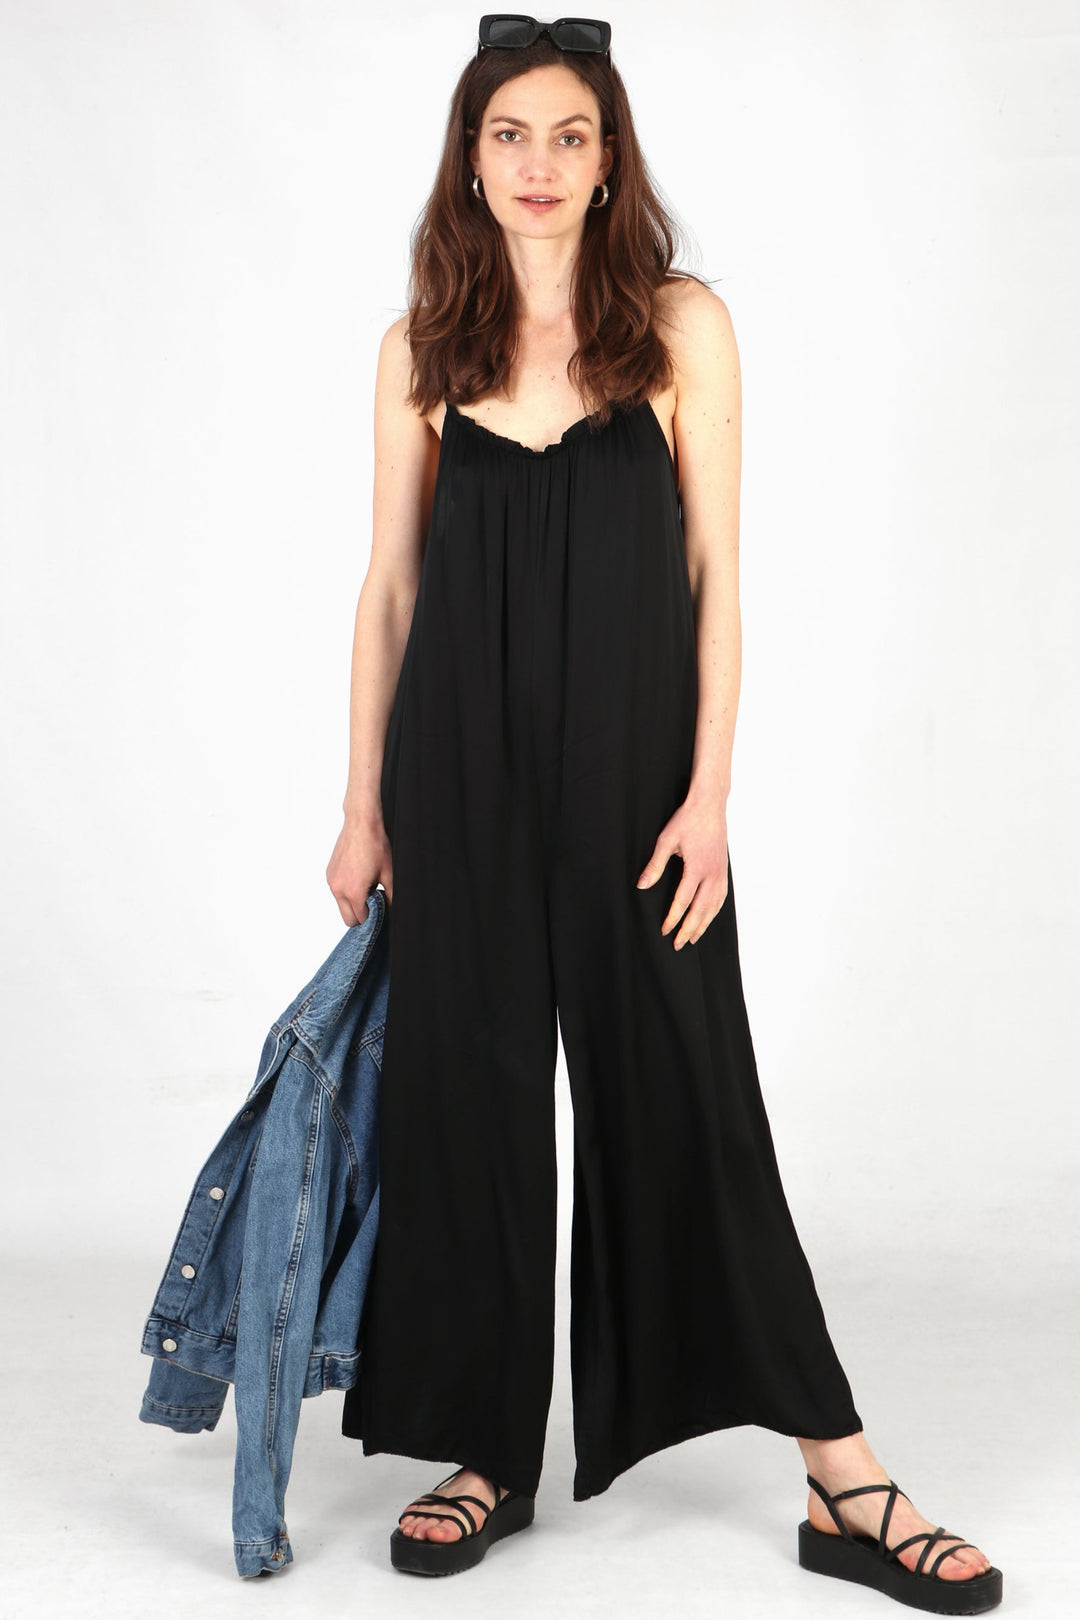 Model wearing black silky texture jumpsuit with denim jacket in hand. Style with black sandals